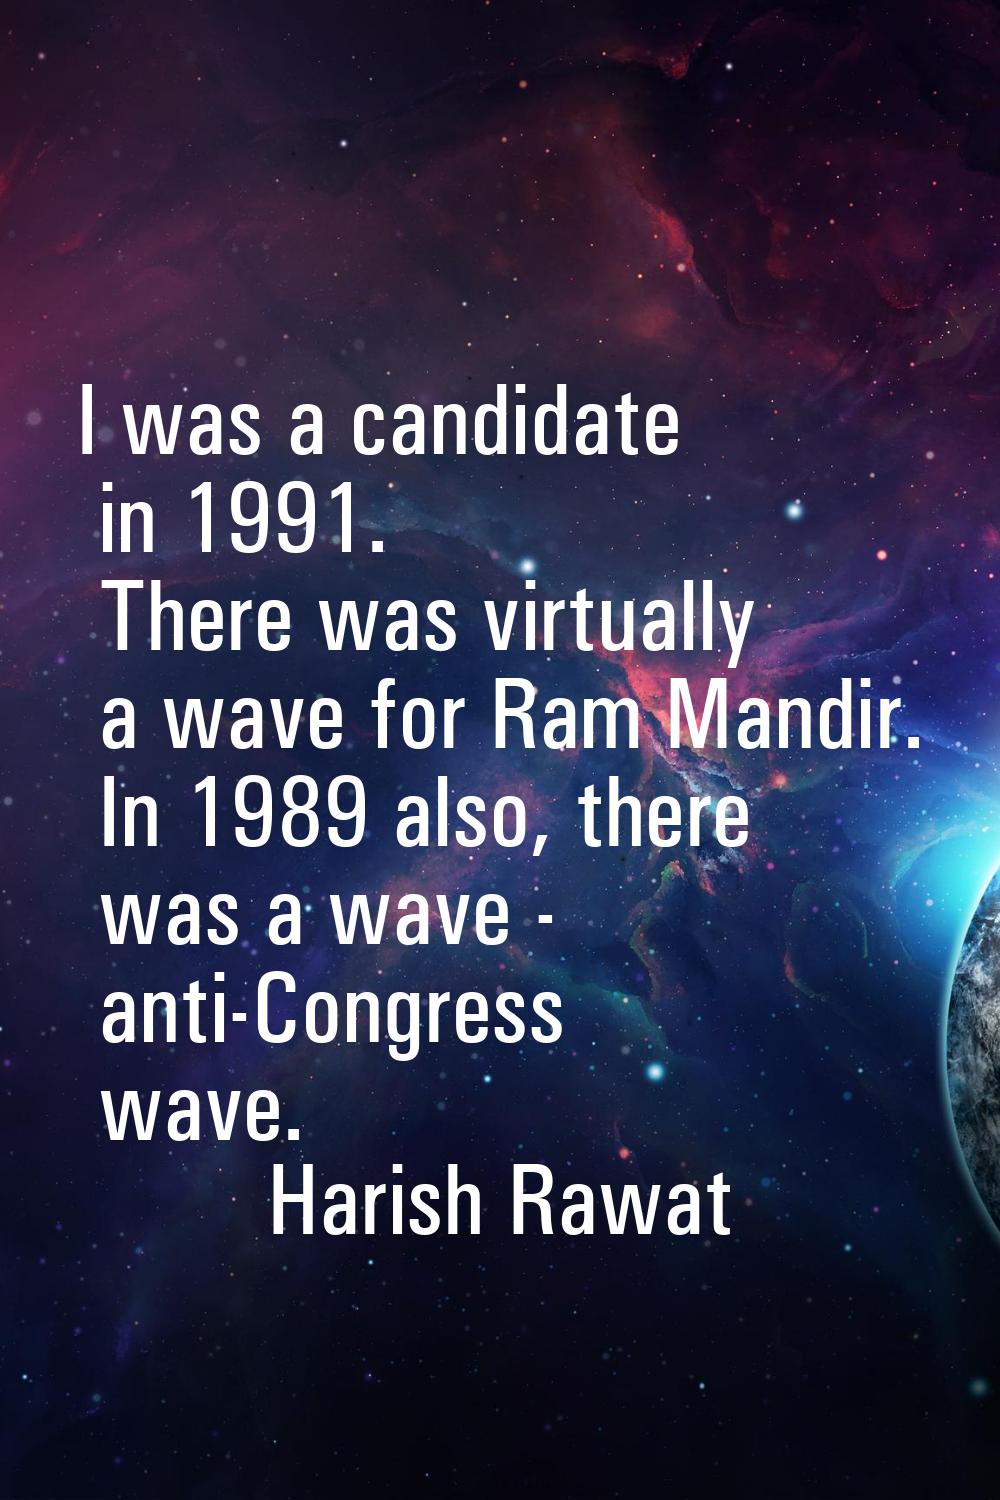 I was a candidate in 1991. There was virtually a wave for Ram Mandir. In 1989 also, there was a wav